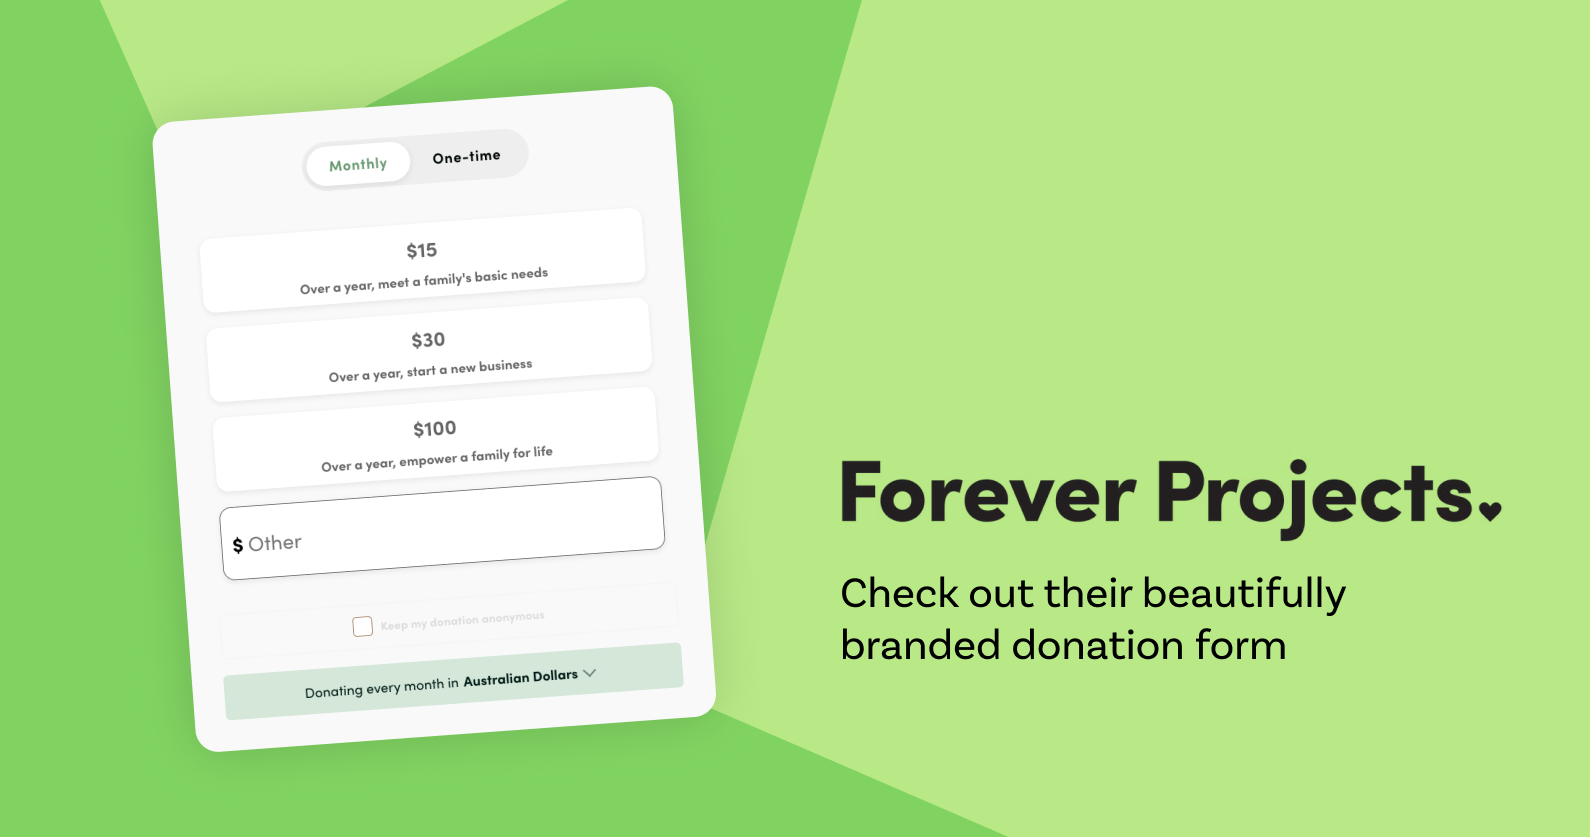 Screenshot of a Raisely donation form on Forever Projects' website.